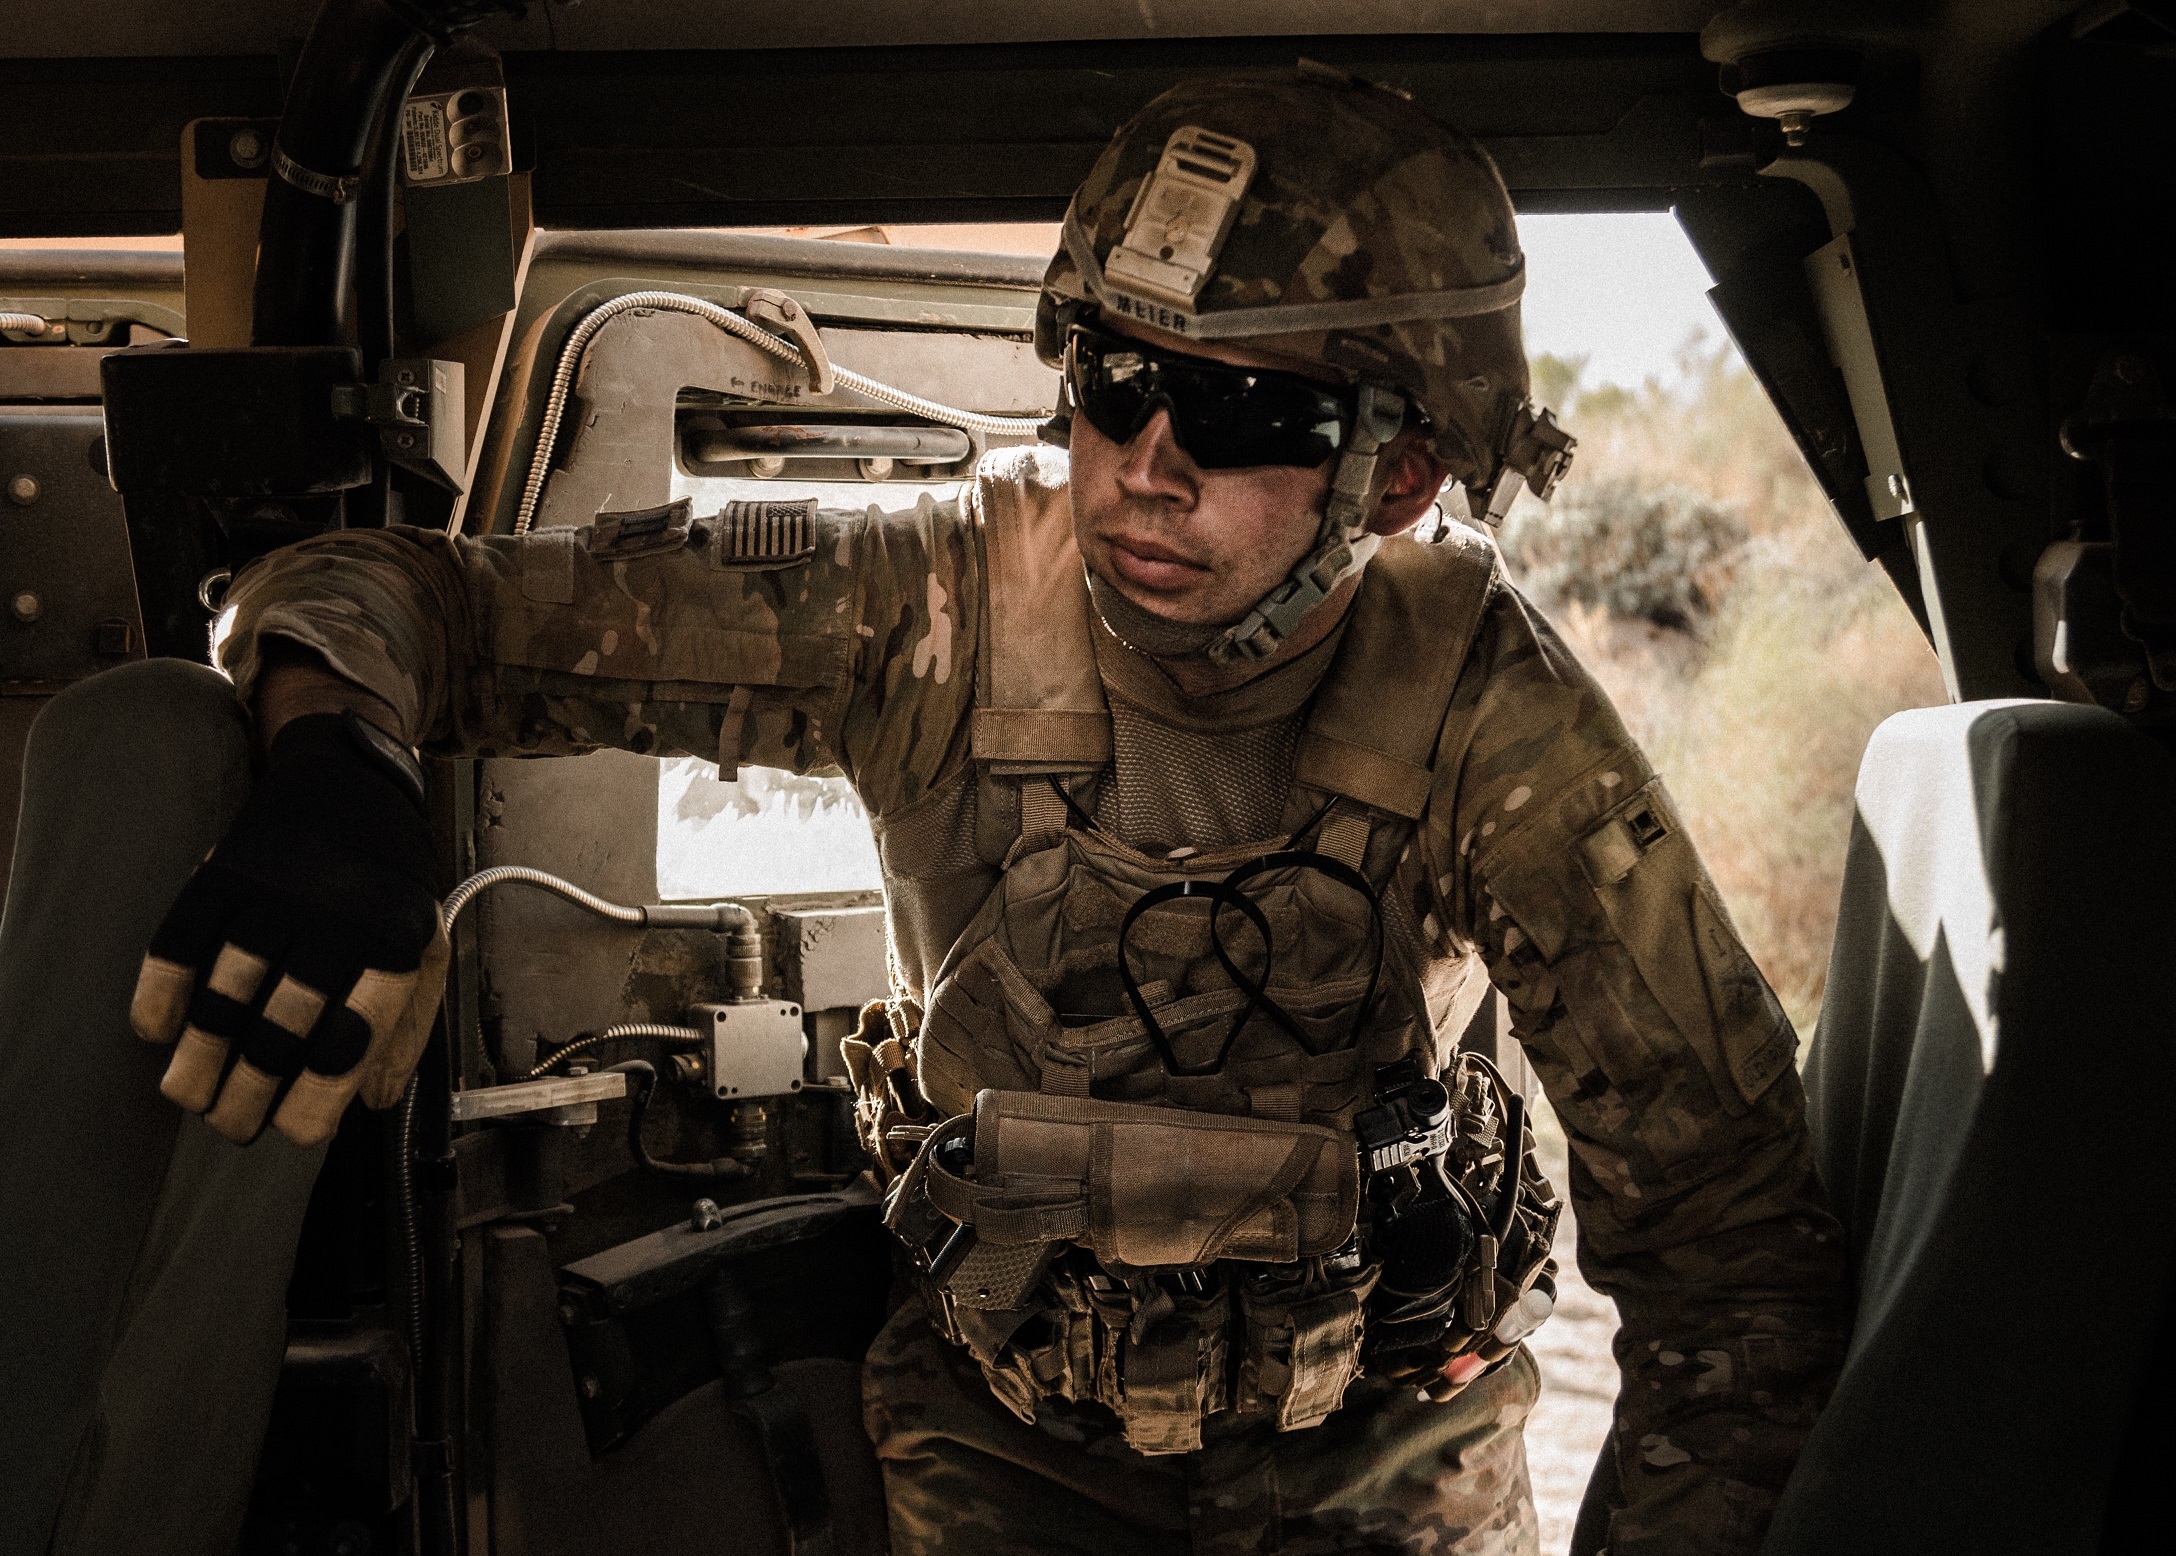 The Advantages of Plate Carrier Vests for Military, Law Enforcement, and Security